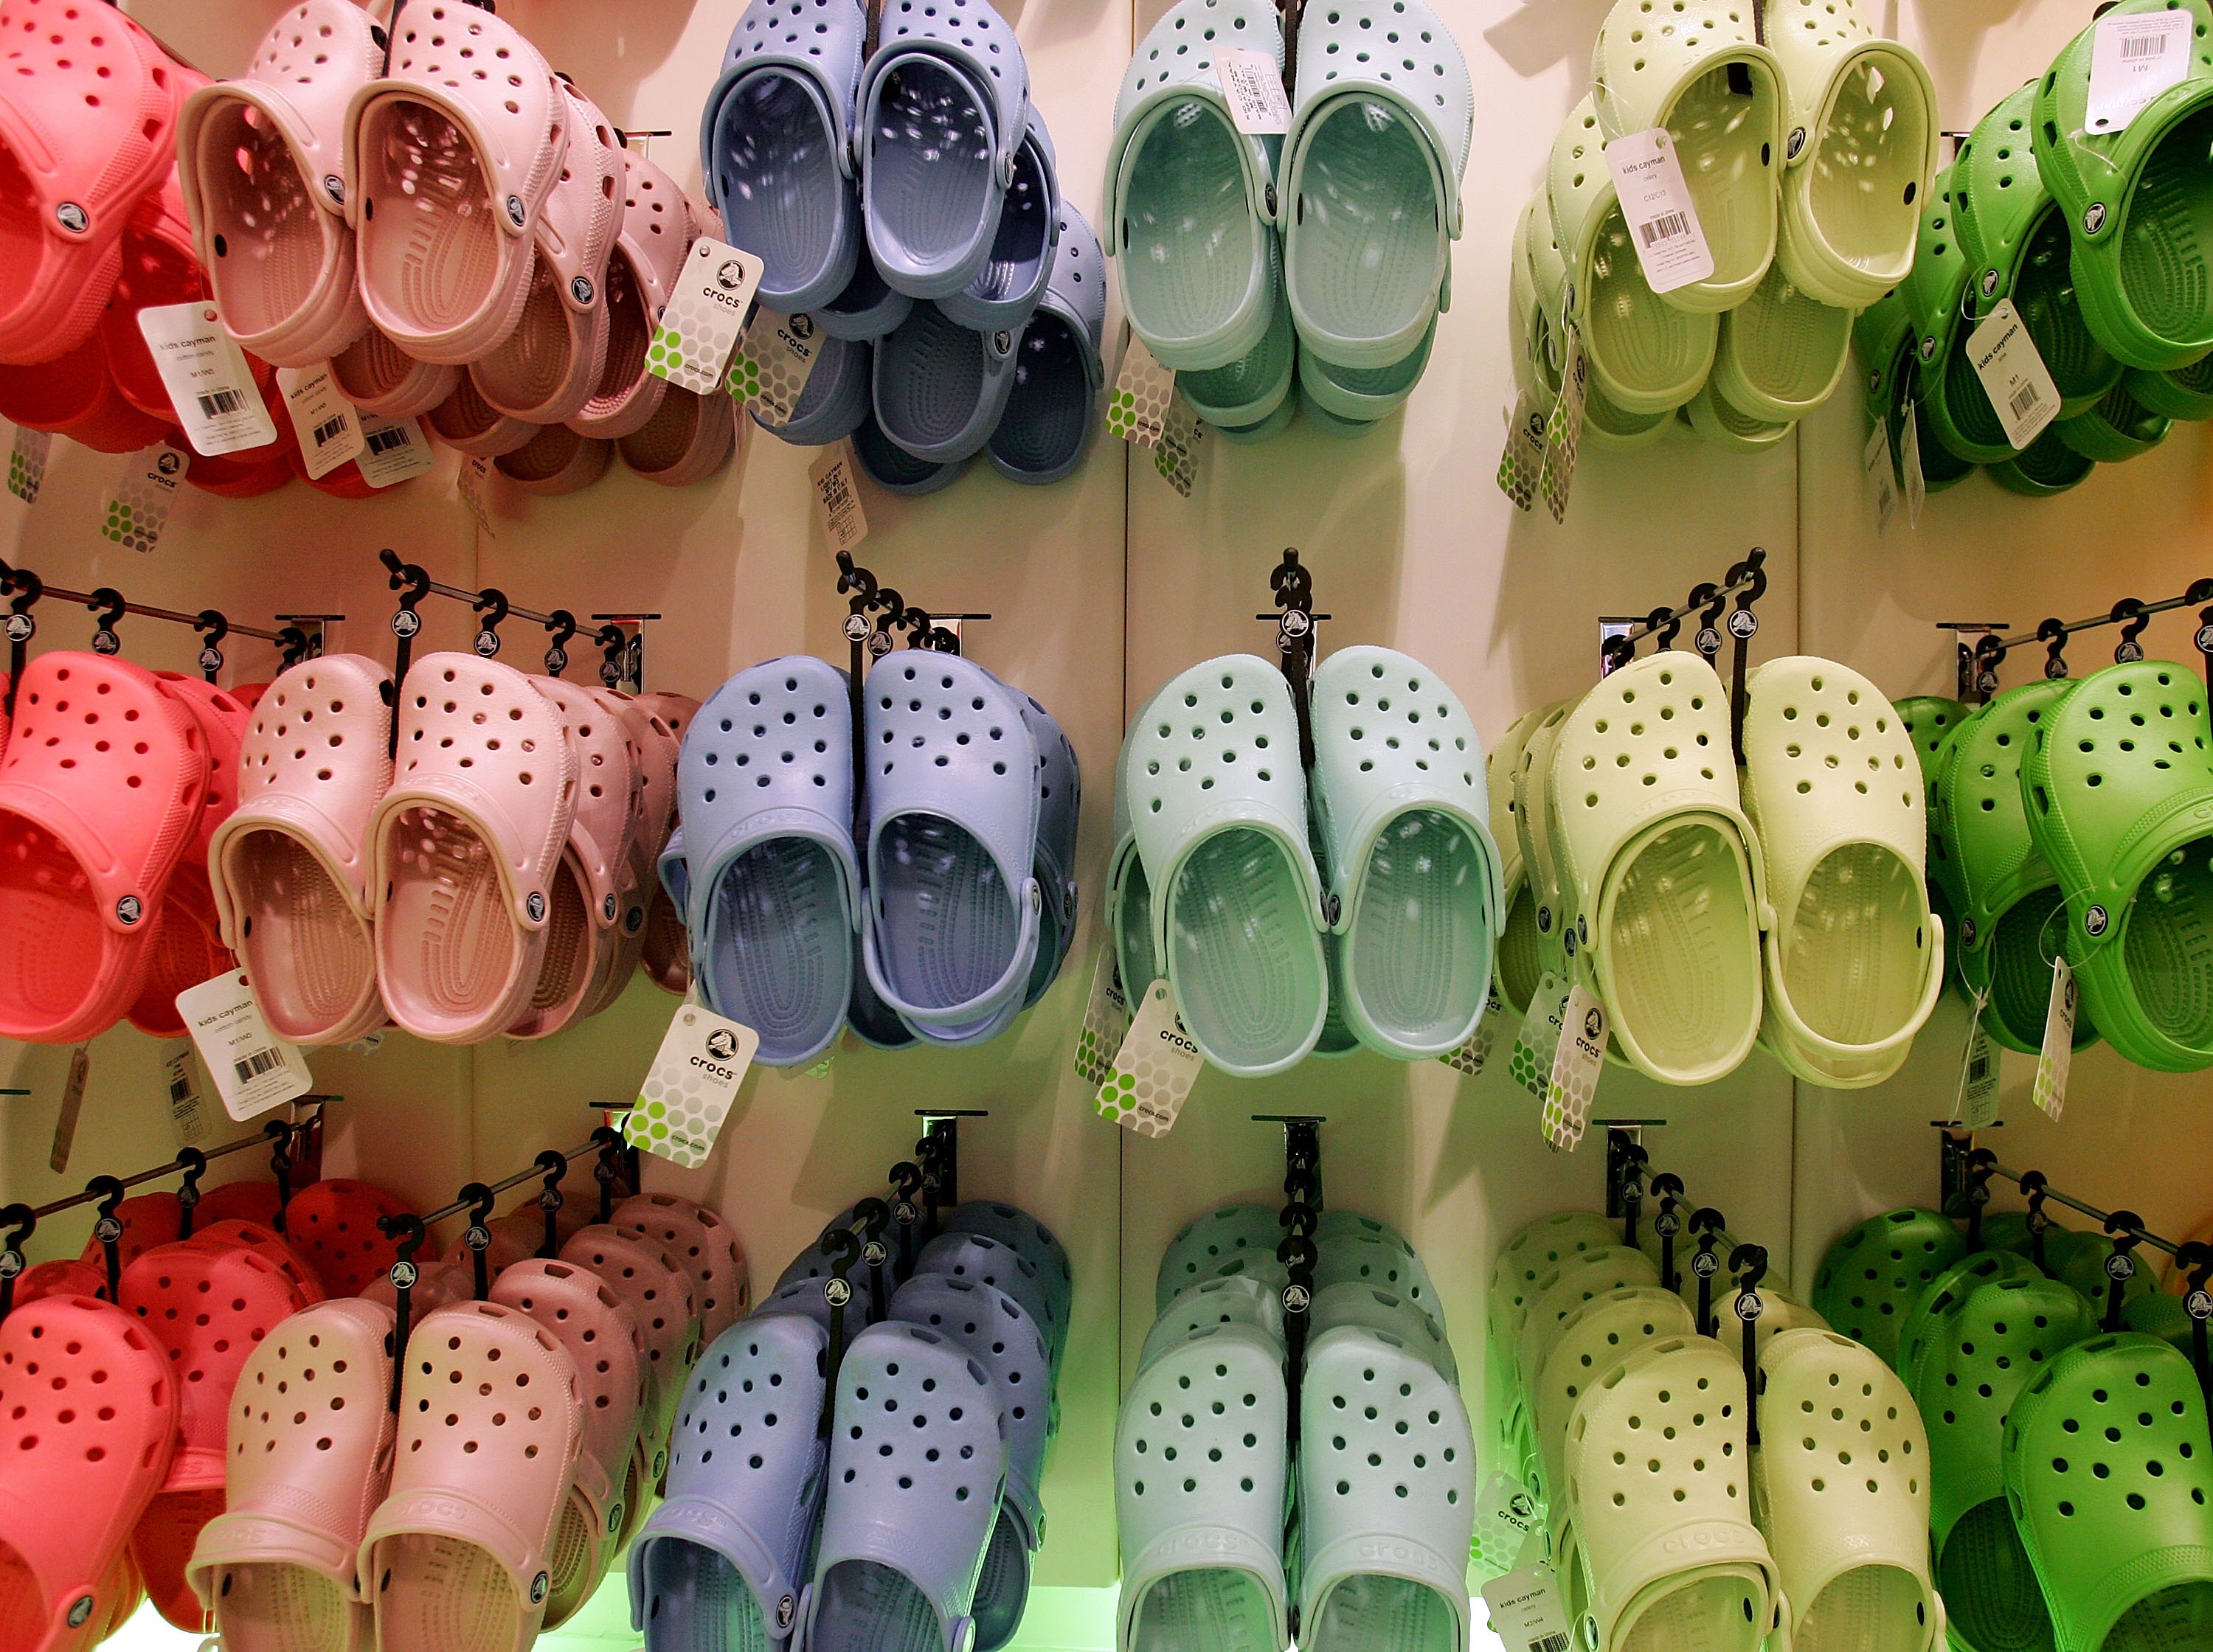 Crocs Are Officially 20 Years Here's Why Now's The Time To Buy A Pair ...